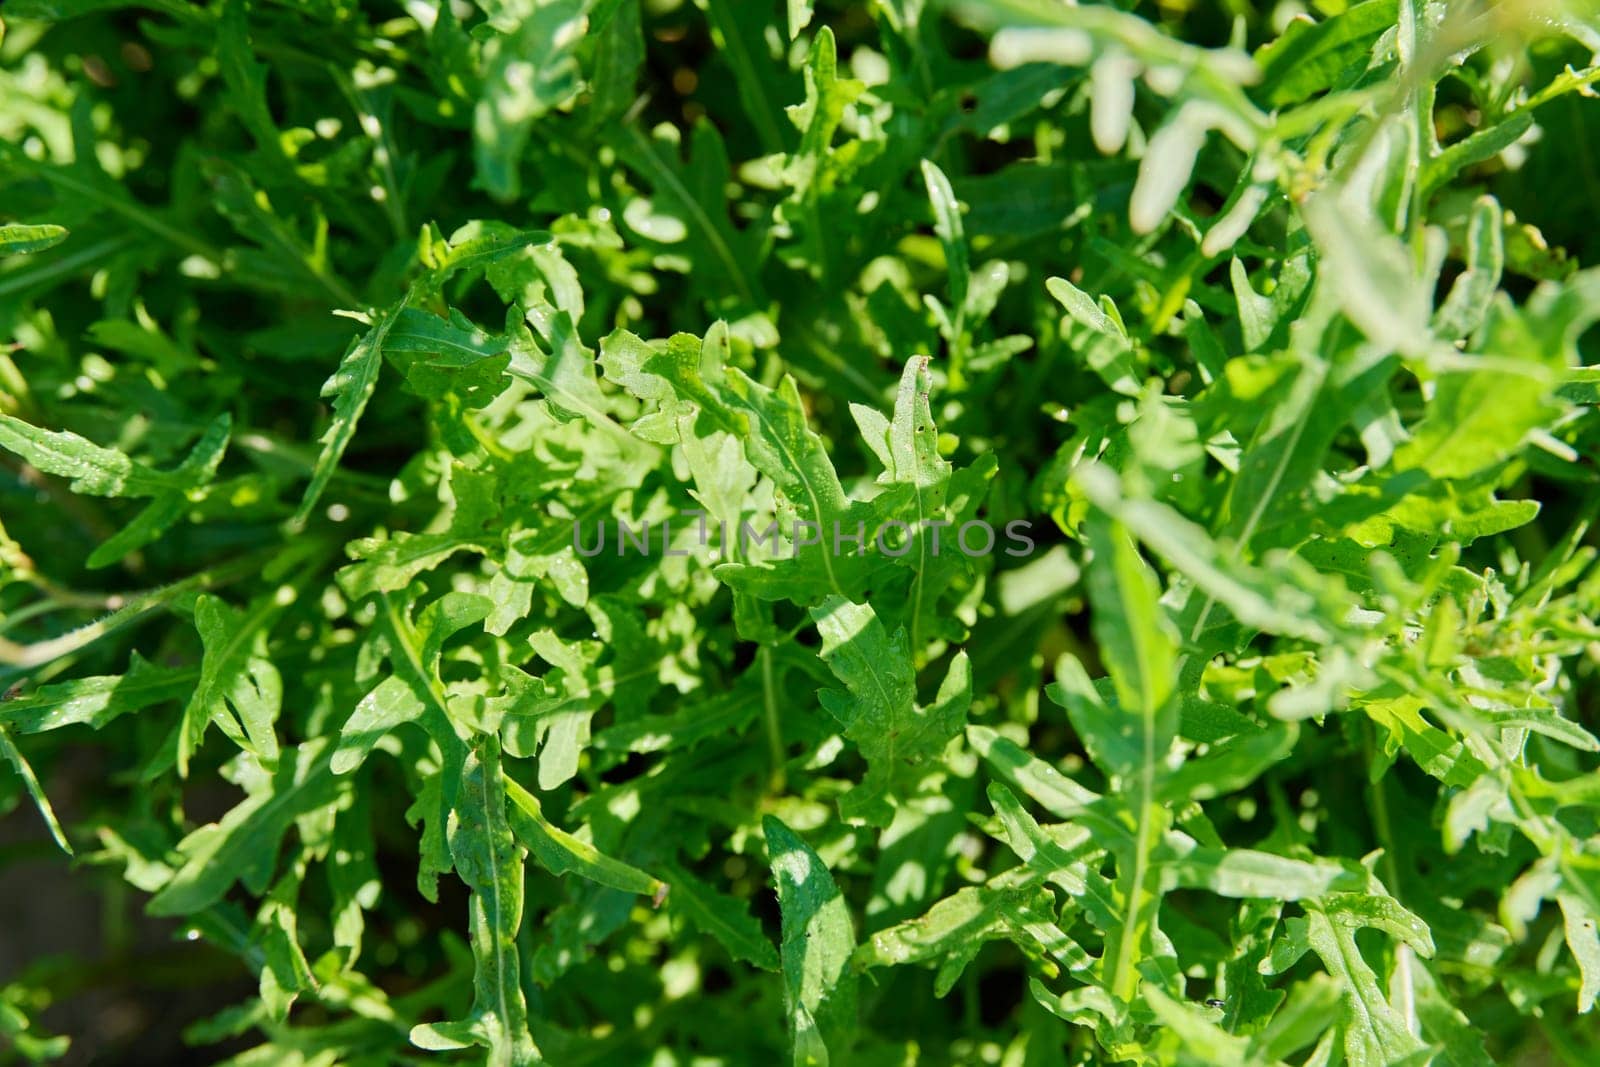 Top view closeup of arugula leaves in sunlight. Agriculture, farmers market, organic food